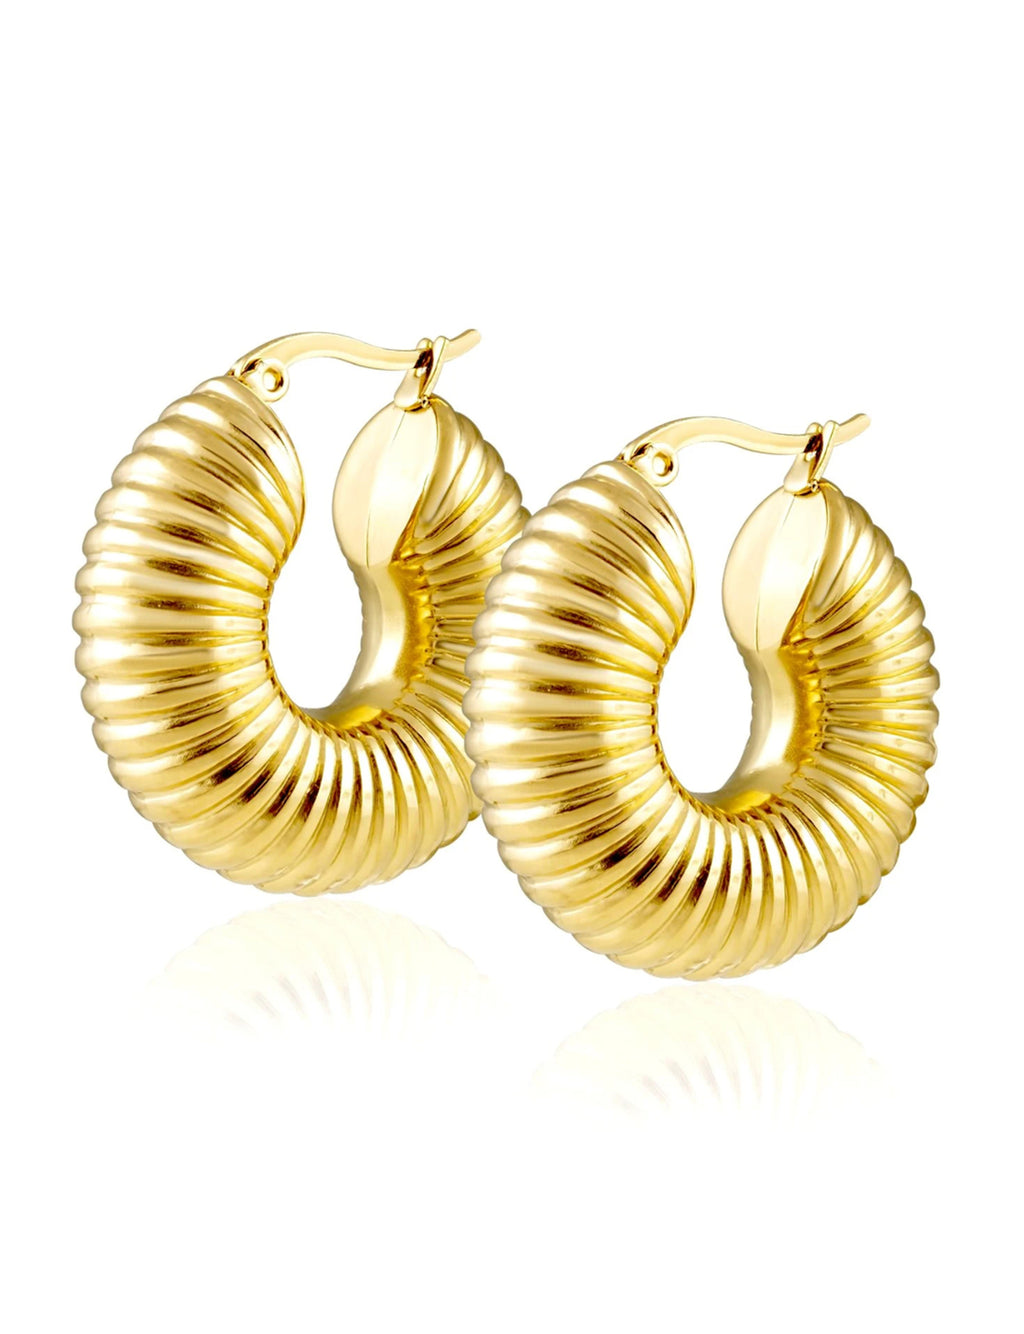 Robyn Tube Hoops, Gold Plated